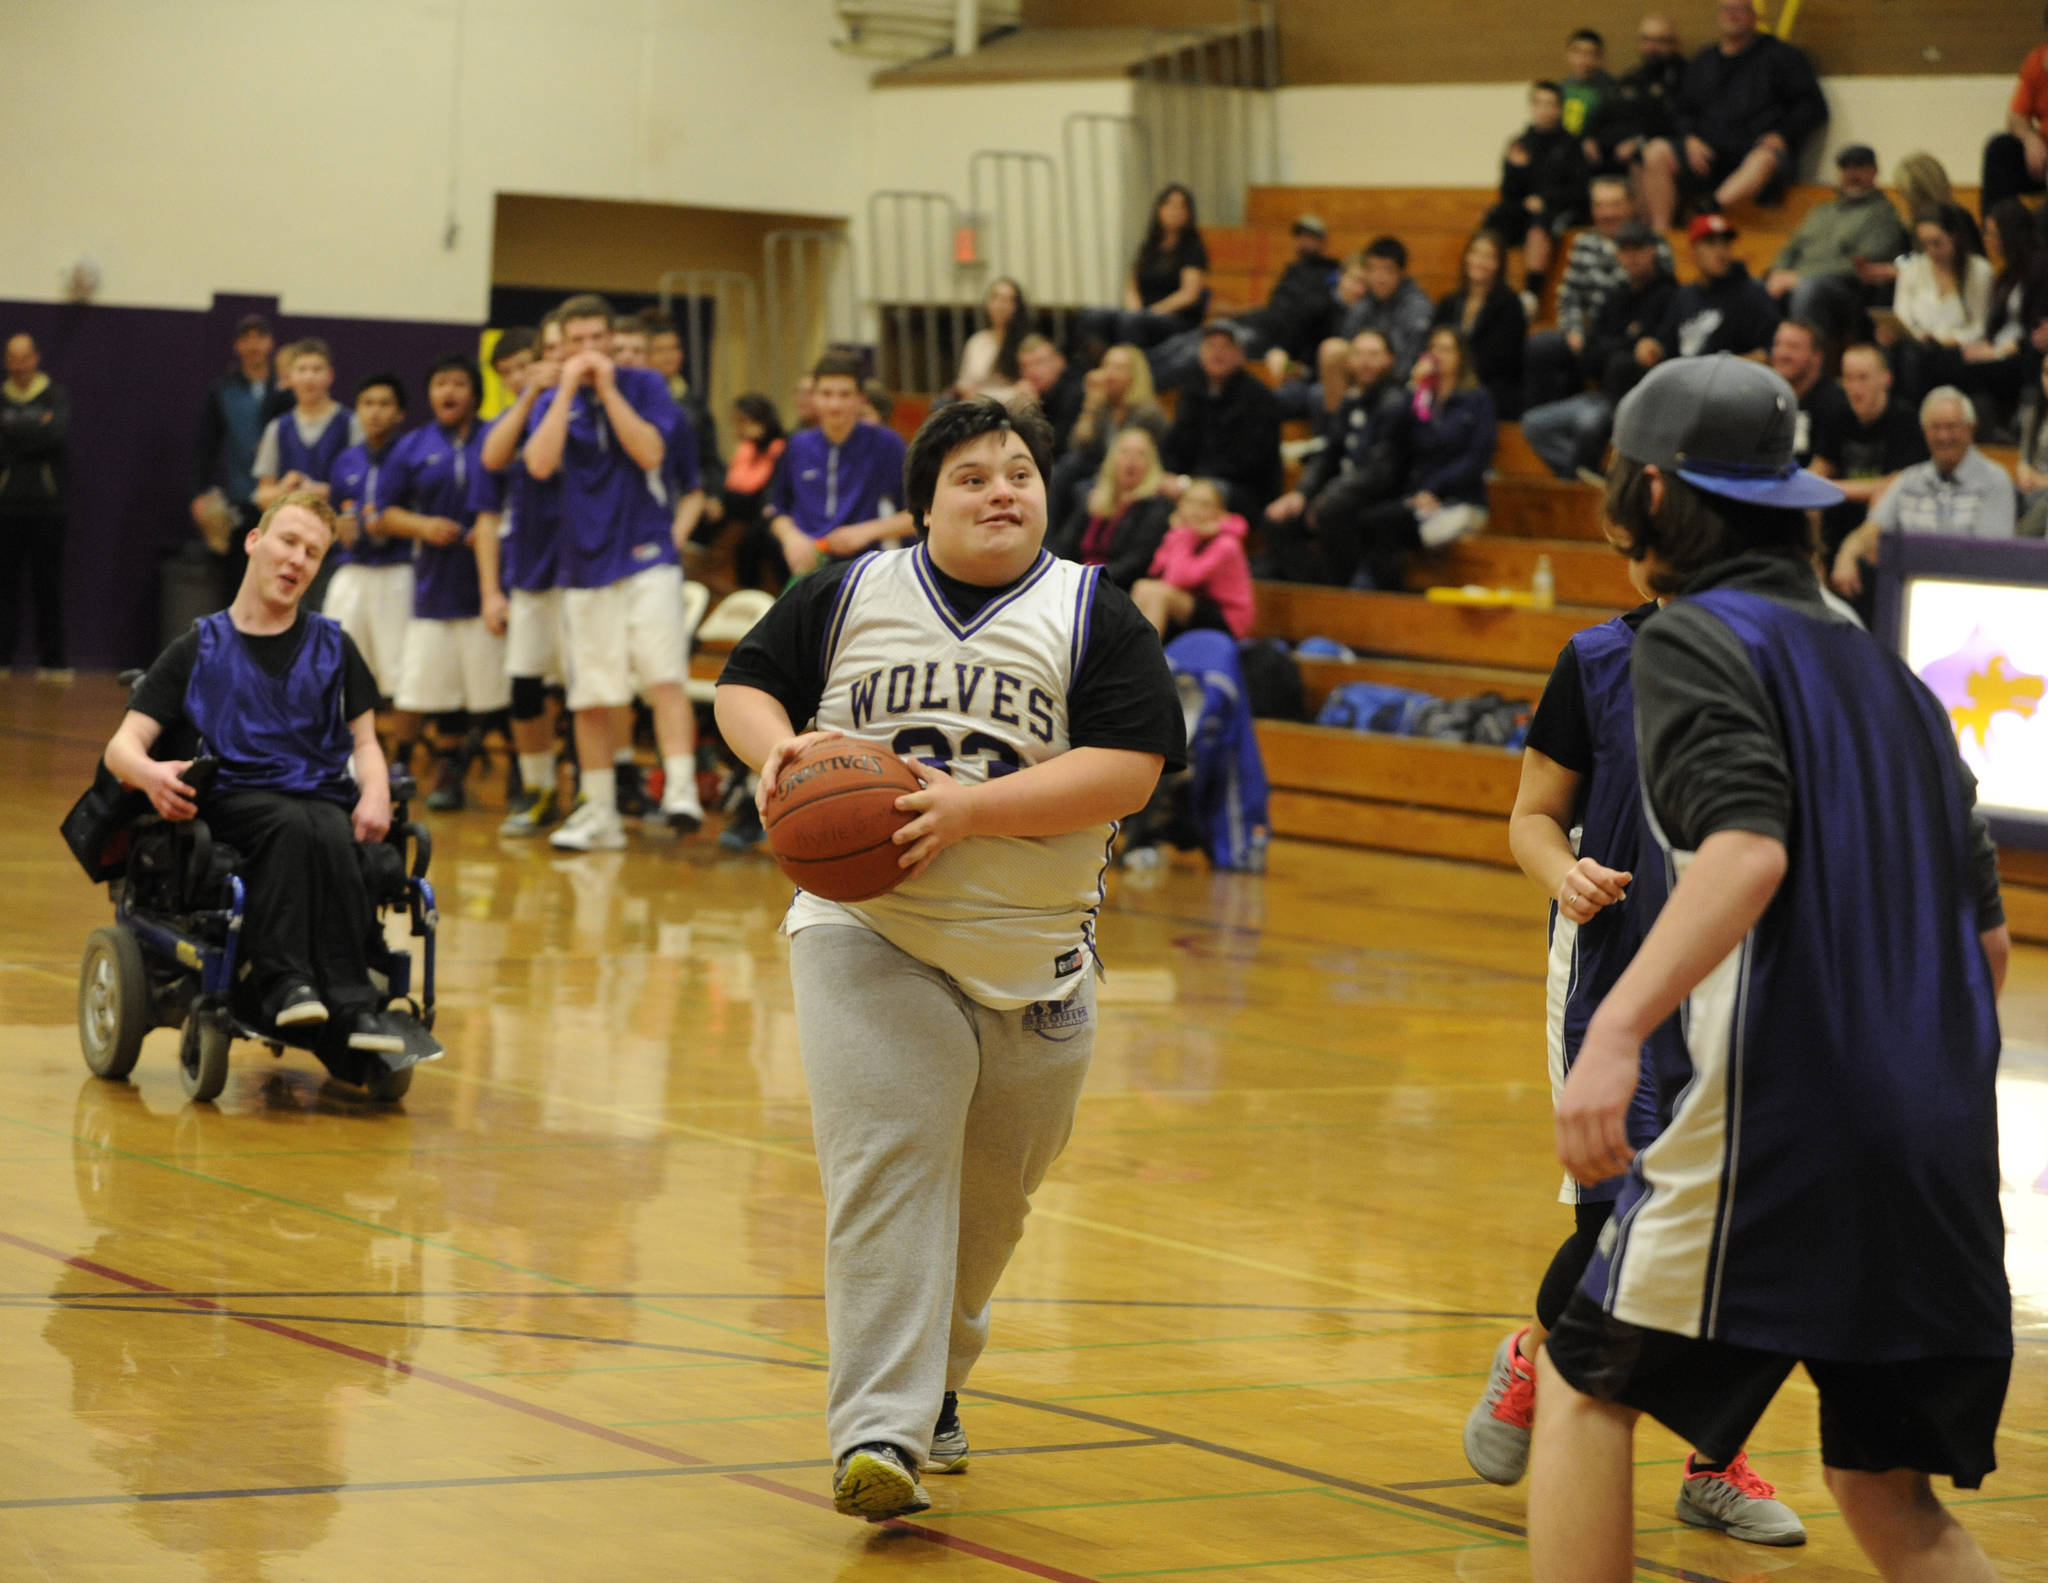 Nick Barrett and other Sequim High School students take part in the school’s first Unified Basketball game in January 2016. Unified is an offshoot of Special Olympics, a program where athletes and partners work together to create a team experience for all. (Michael Dashiell/Olympic Peninsula News Group)